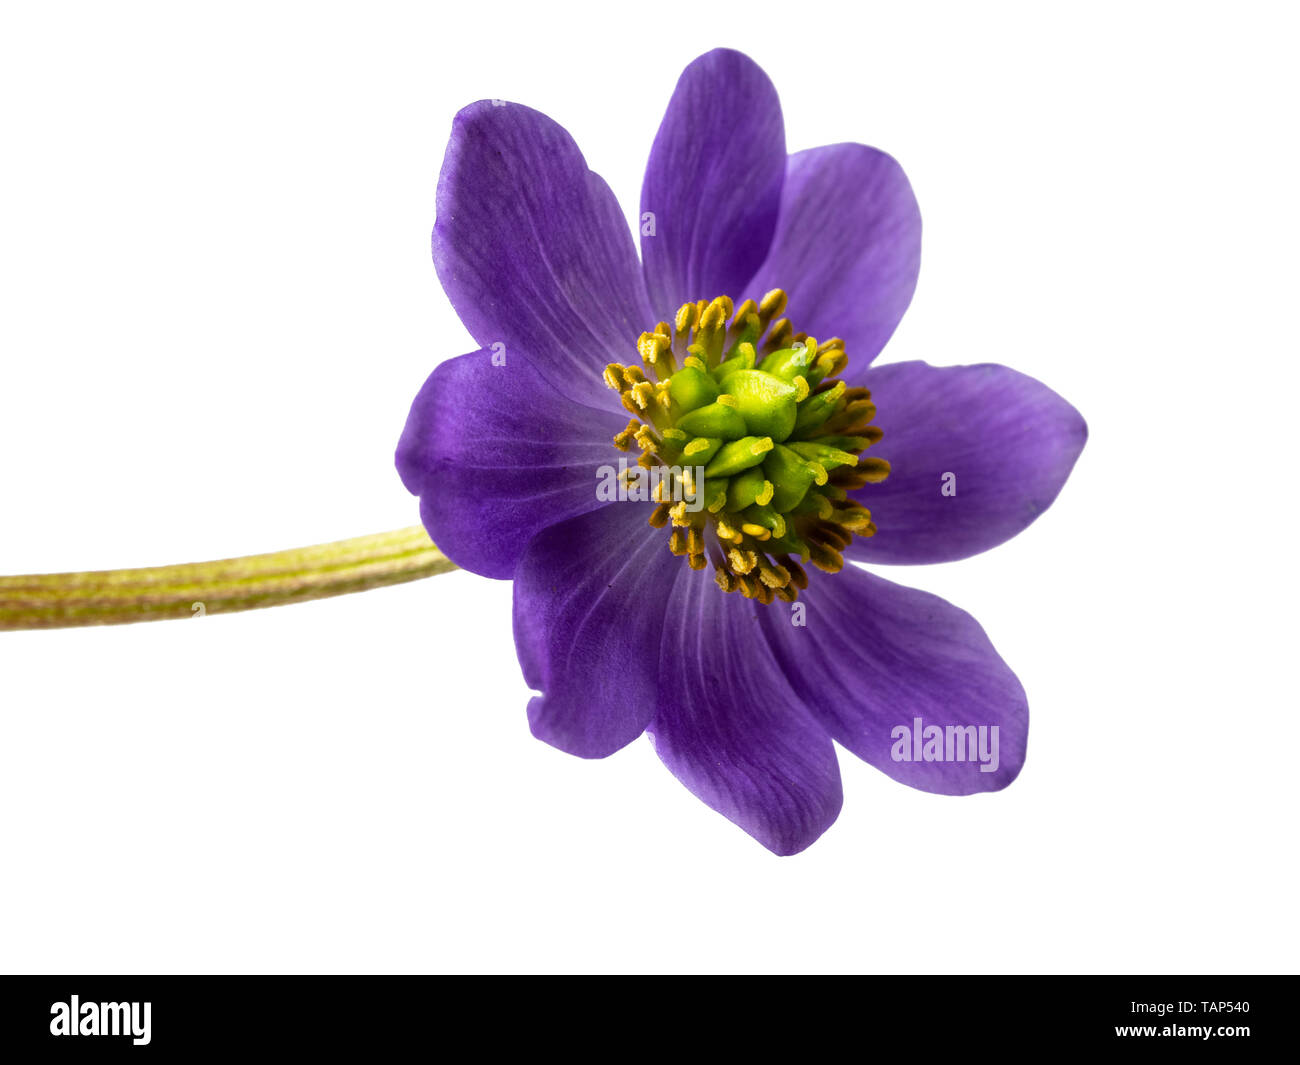 Single,large blue flower of the compact, shade loving perennial, Anemone obtusiloba 'Big Blue', on a white background Stock Photo